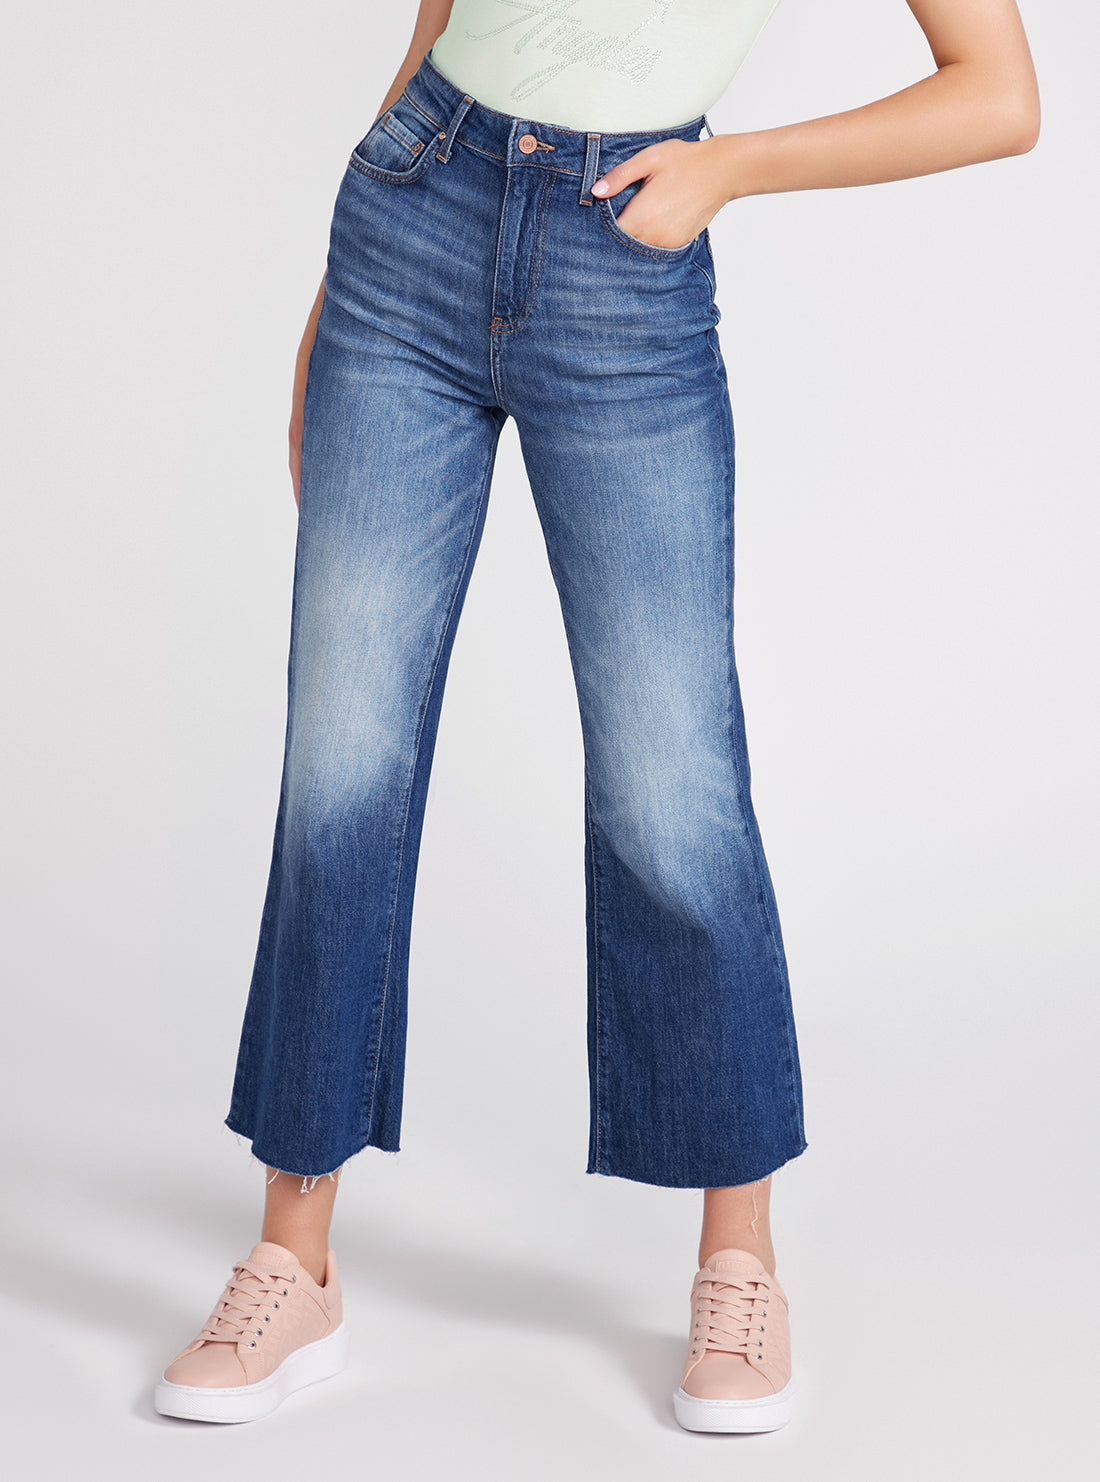 High-Rise Ankle Wide Leg Denim Jeans In Feel Free Wash | GUESS Women's Denim | front view